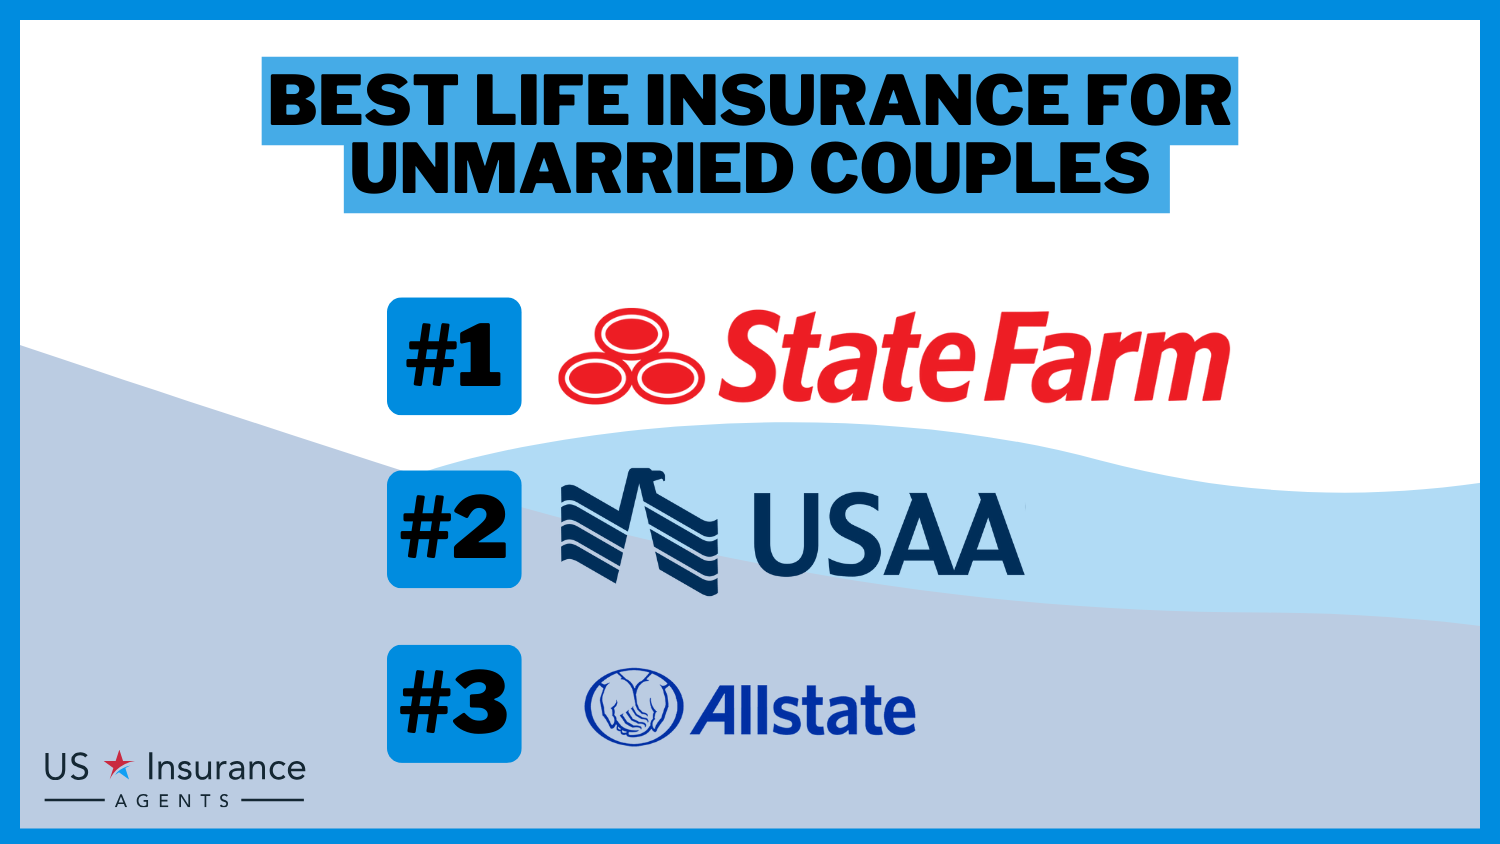 3 Best Life Insurance for Unmarried Couples: State Farm, USAA and Allstate.